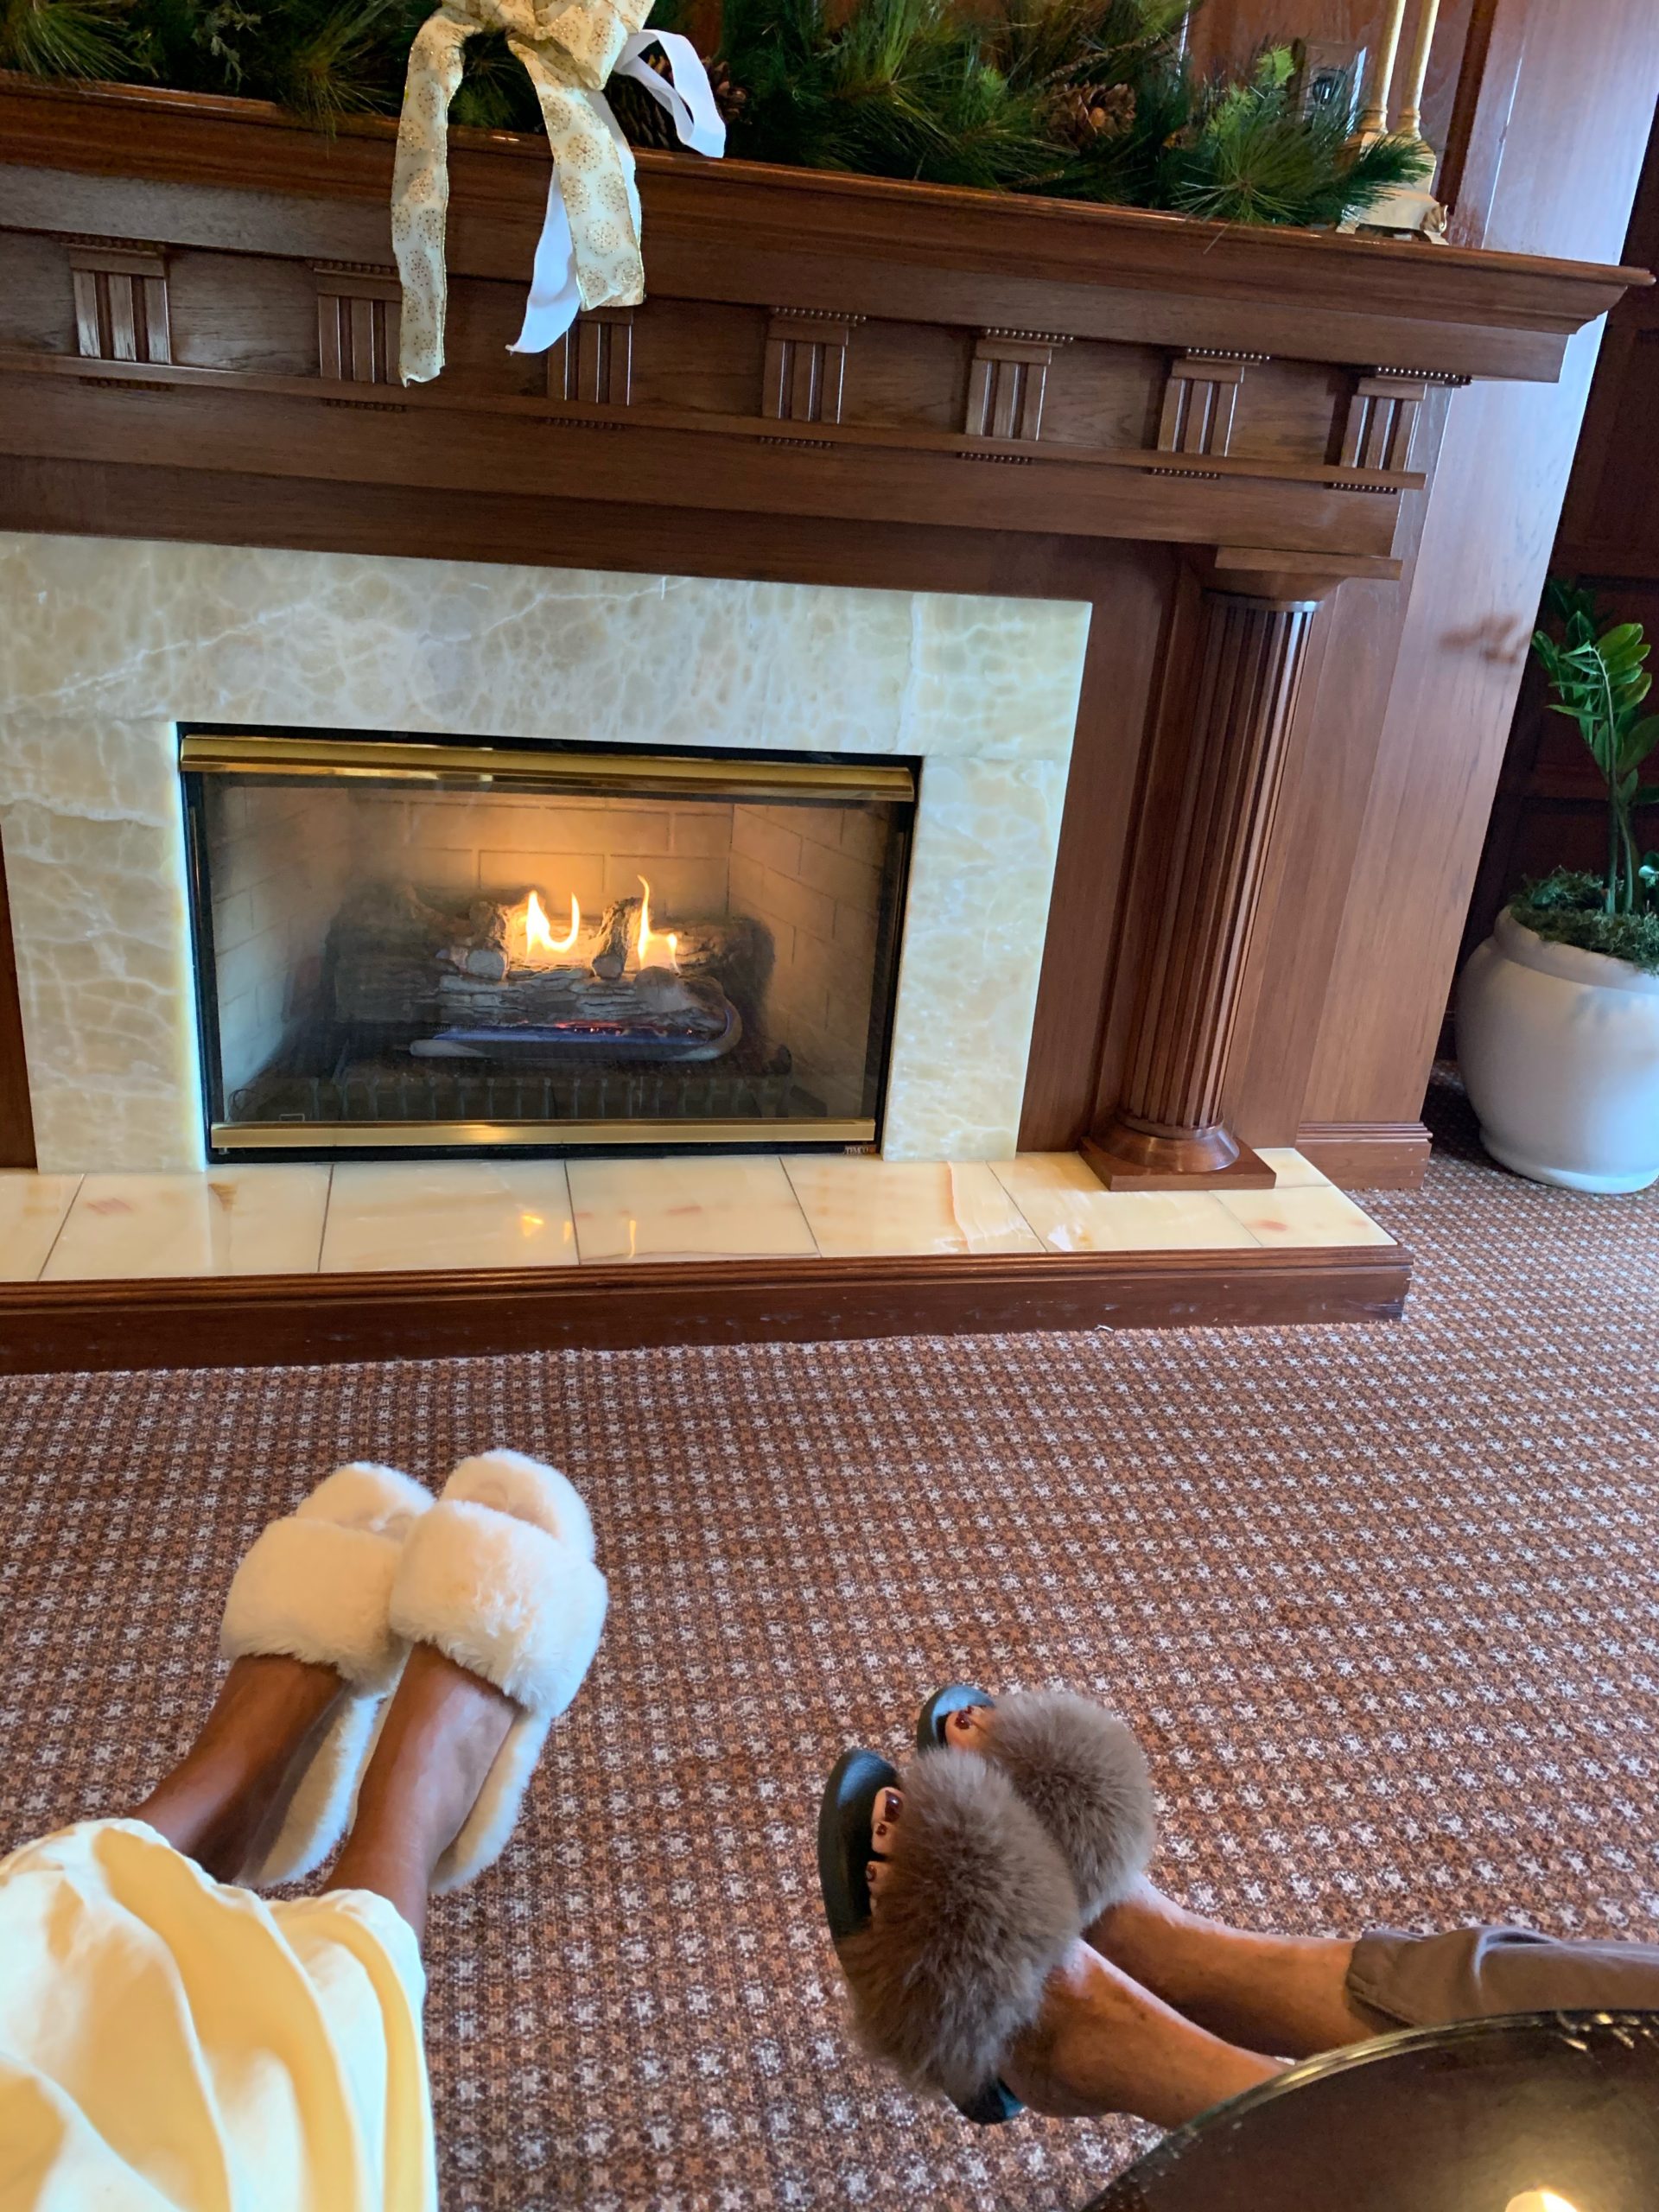 Our furry slippers by the fireplace, the Spa at The Hotel Hershey